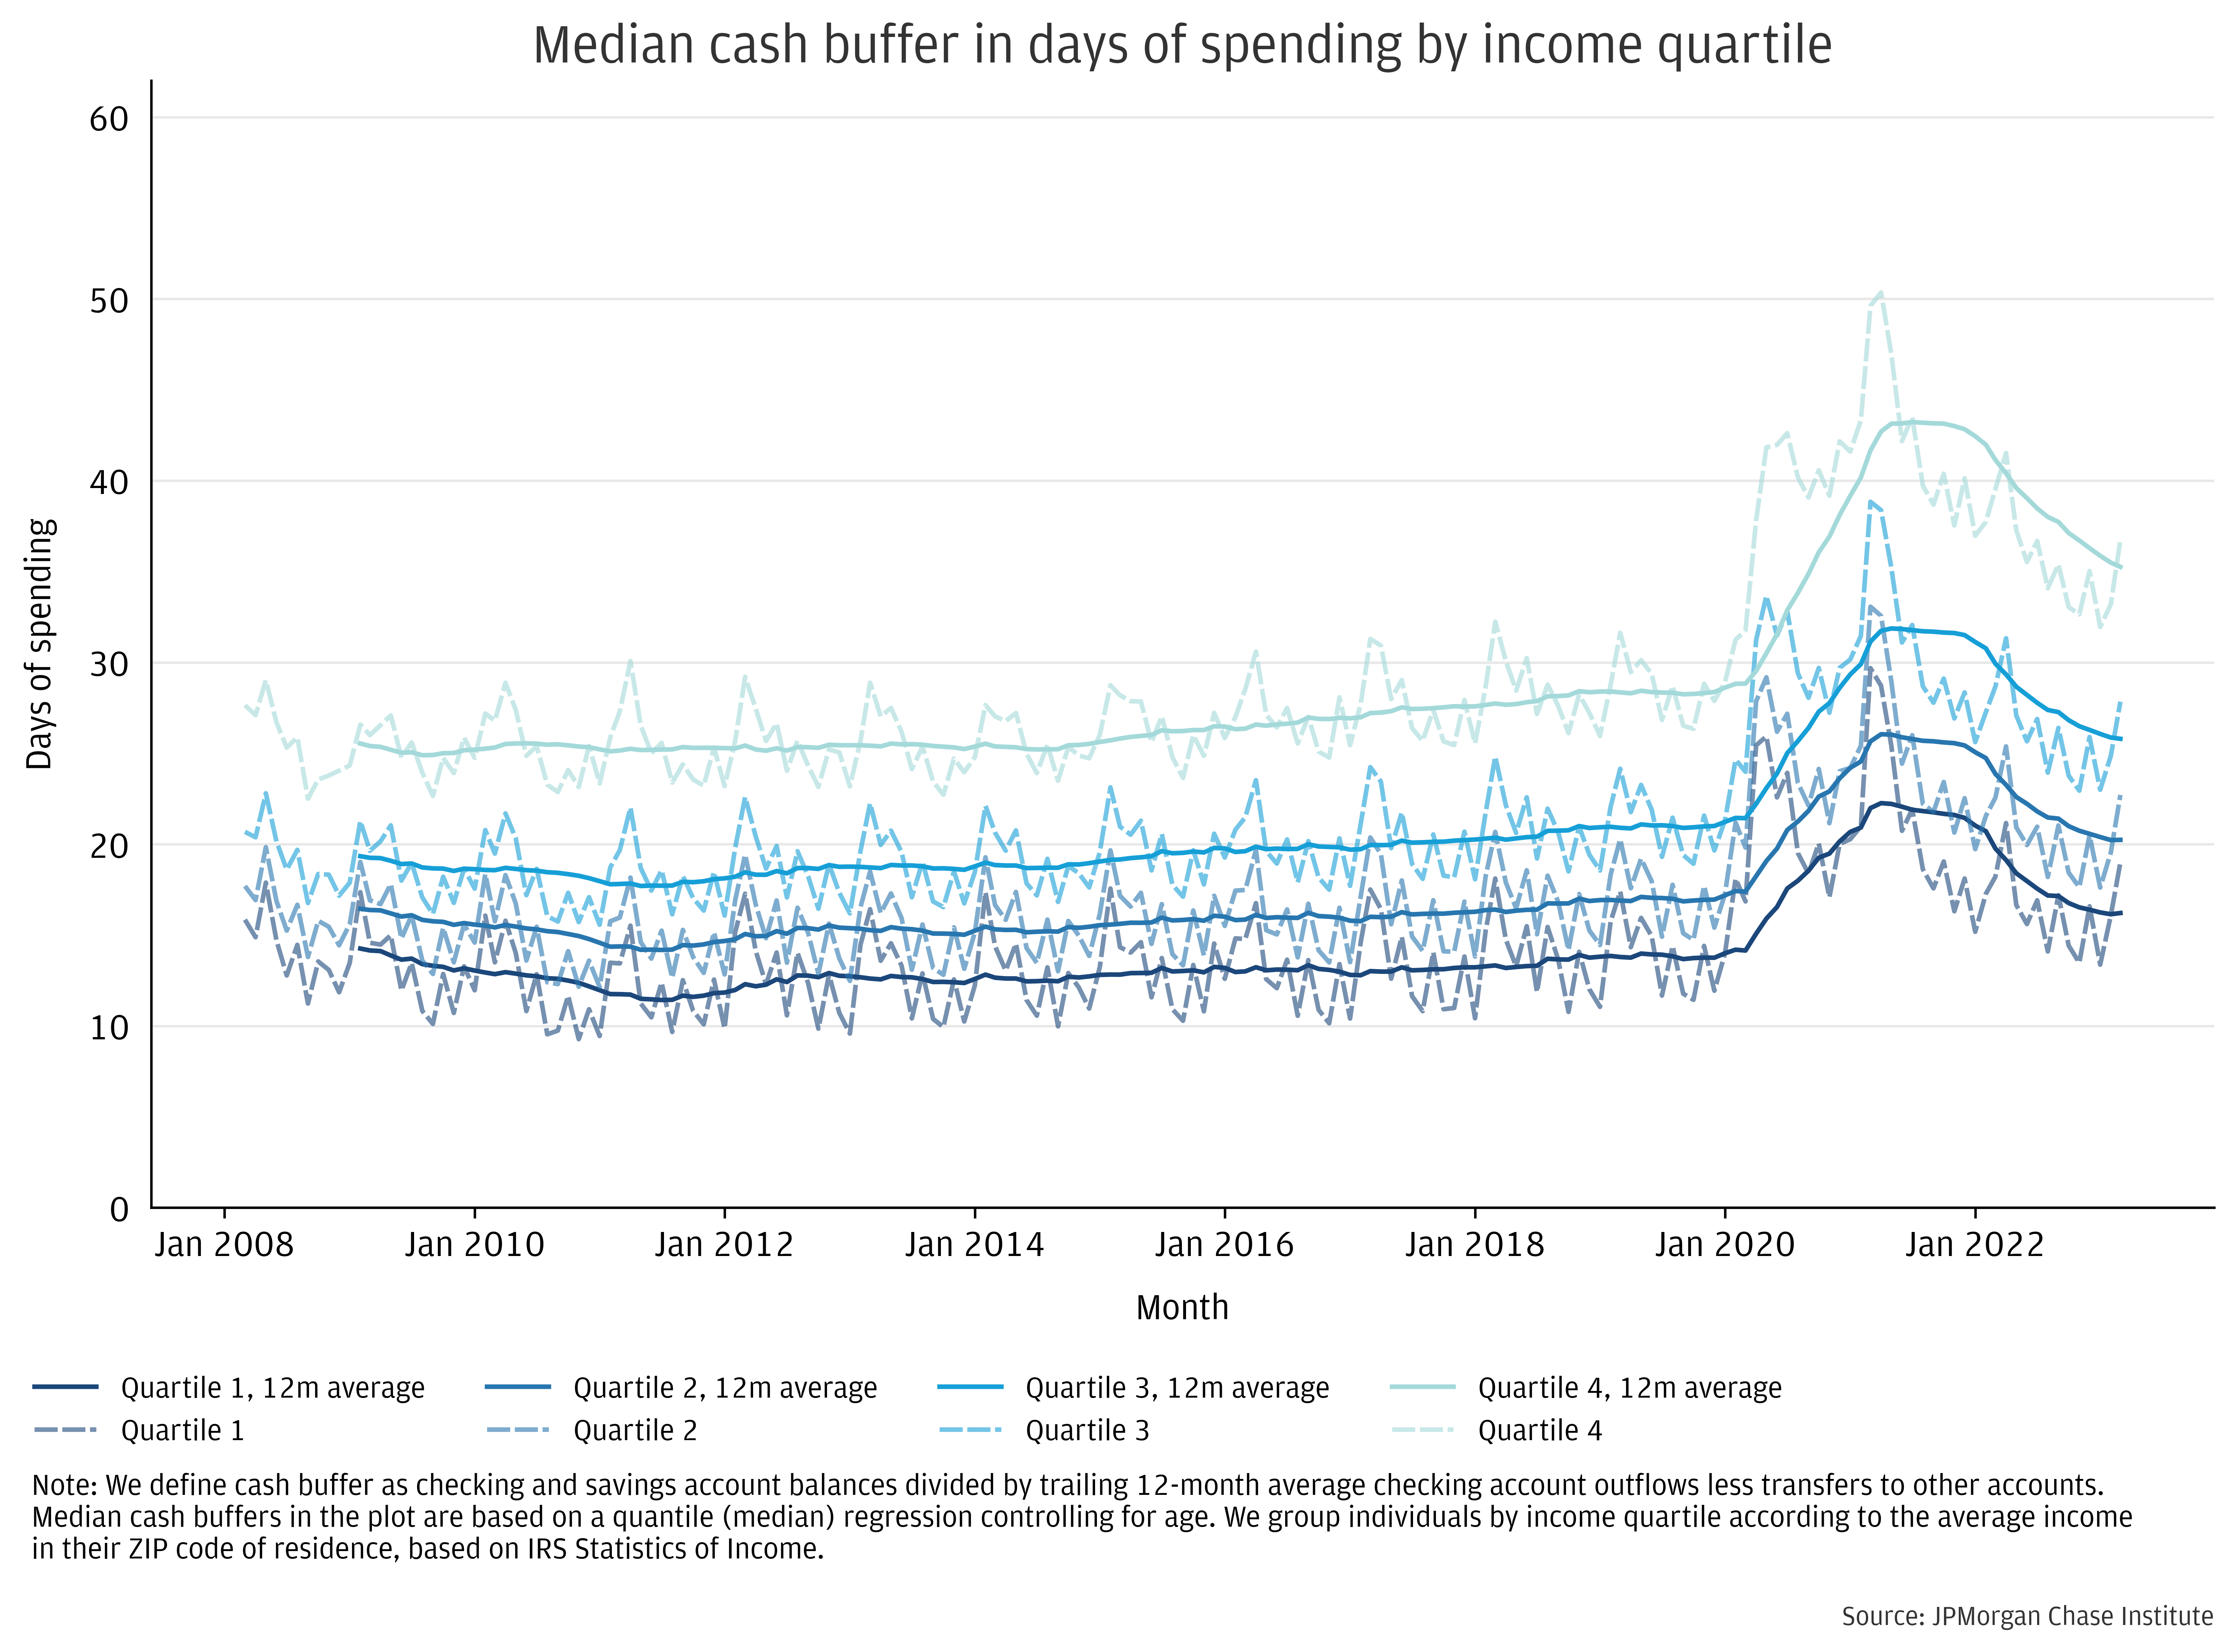 Median Cash Buffer in Days of Spending by Income Quartile 